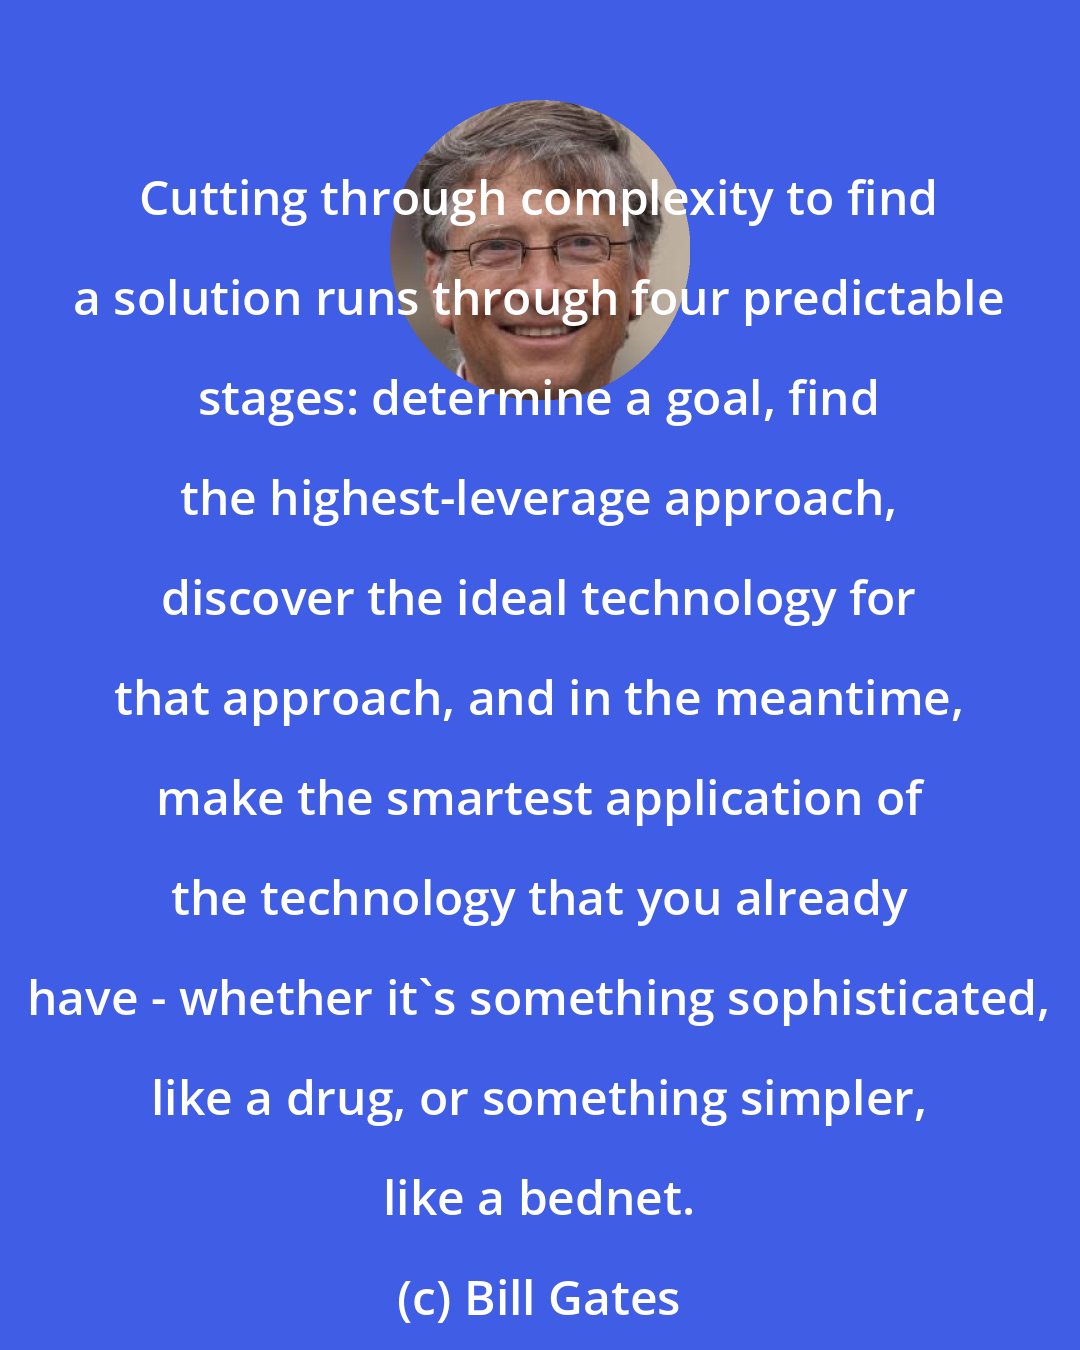 Bill Gates: Cutting through complexity to find a solution runs through four predictable stages: determine a goal, find the highest-leverage approach, discover the ideal technology for that approach, and in the meantime, make the smartest application of the technology that you already have - whether it's something sophisticated, like a drug, or something simpler, like a bednet.